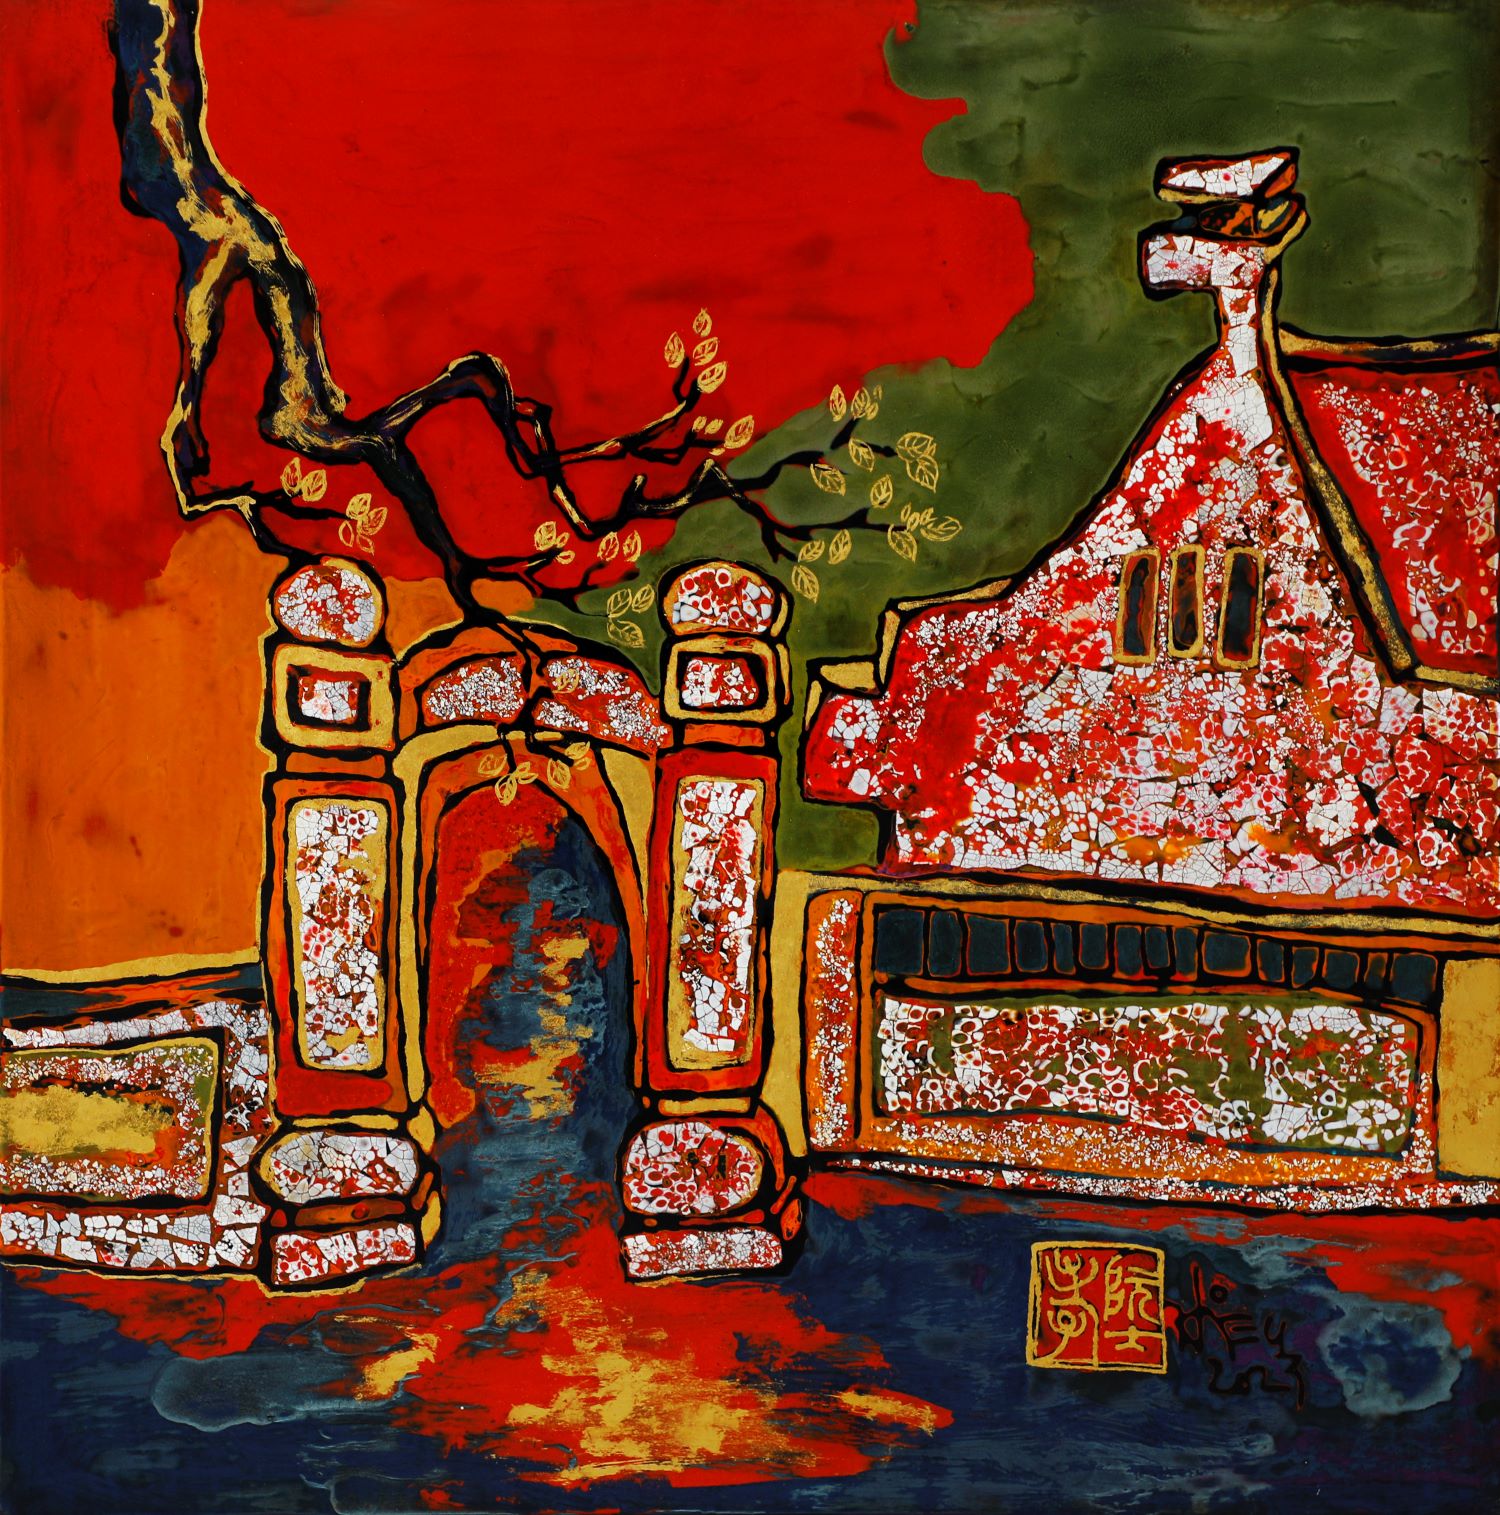 Old House - Vietnamese Lacquer Painting by Artist Sy Hieu